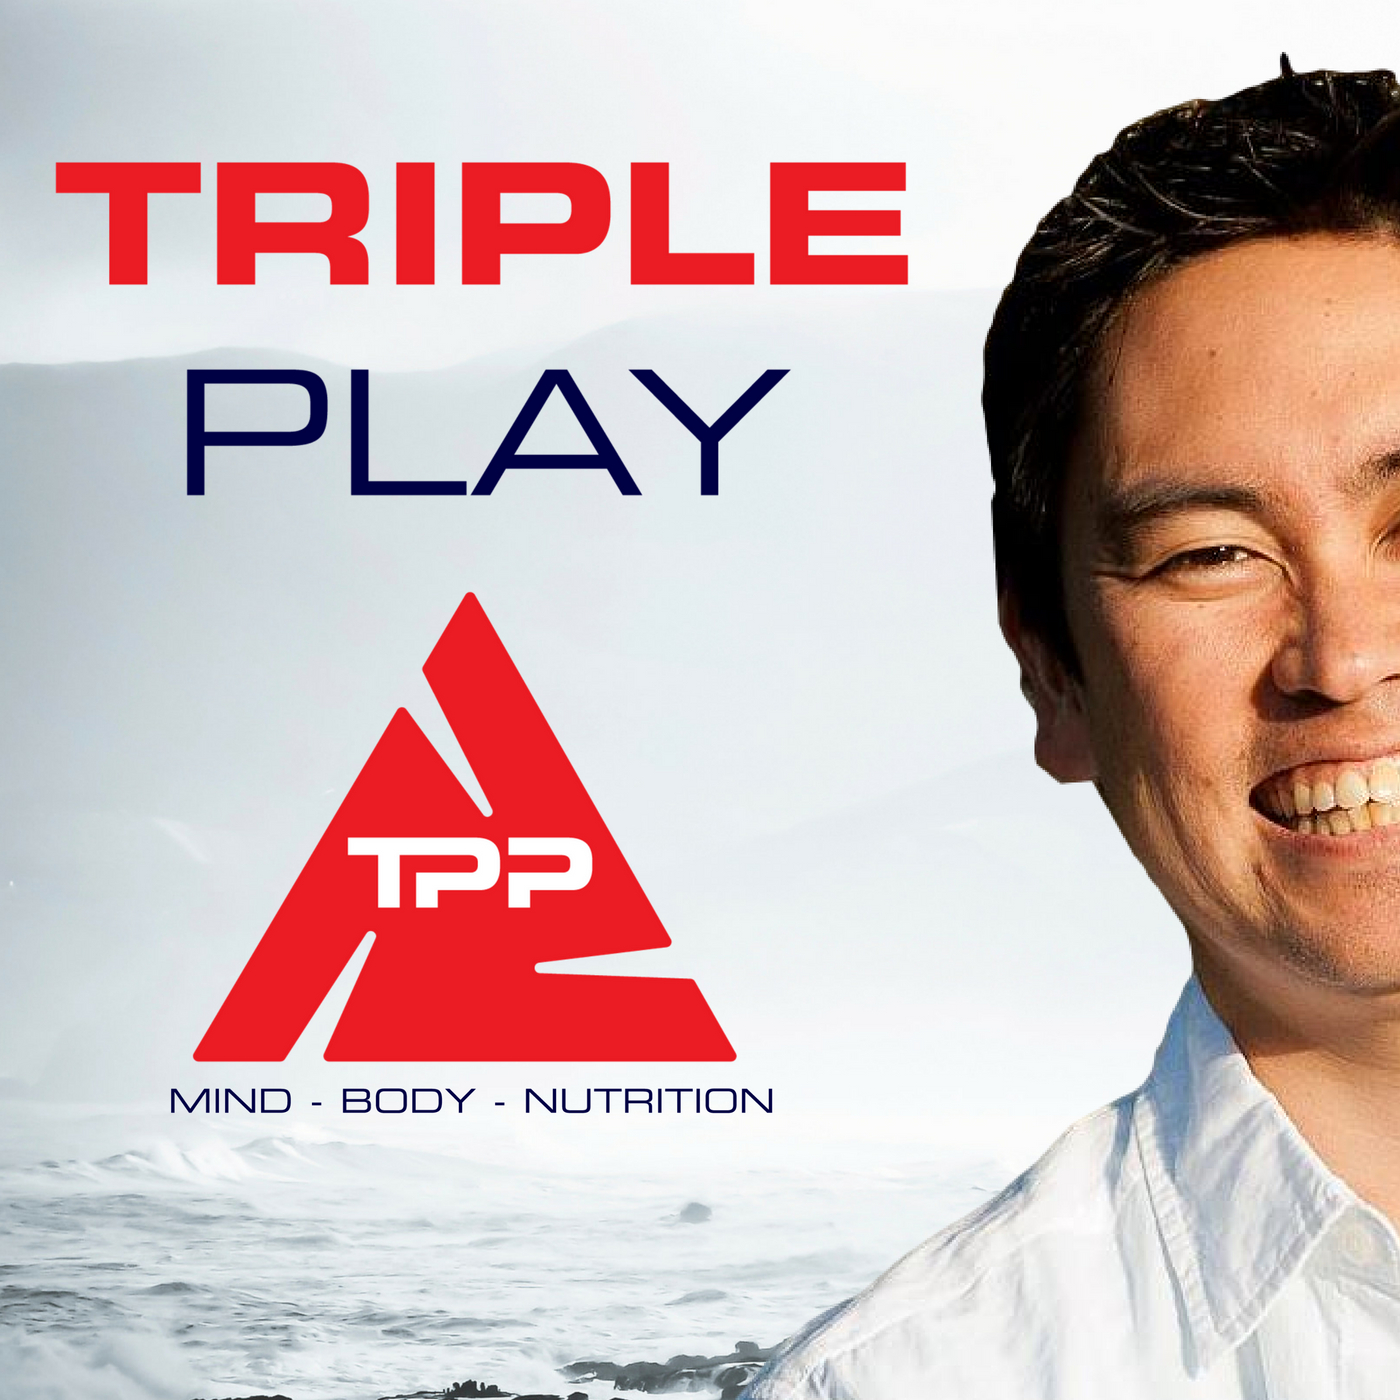 Play Podcast. Triple Play. Player performance